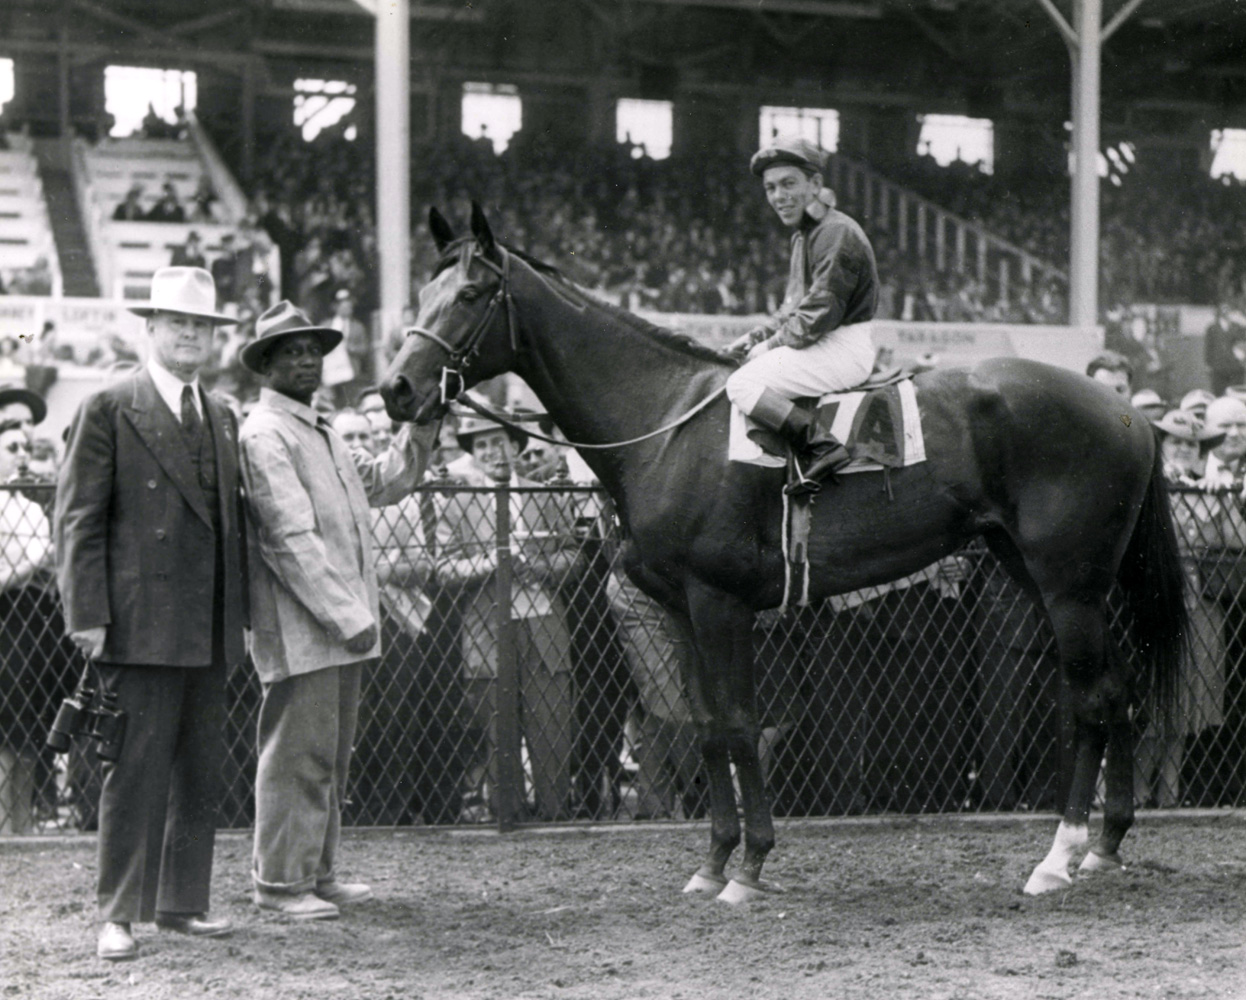 Twilight Tear (Conn McCreary up) in the winner's circle with trainer Ben Jones after winning the 1944 Rennert Handicap at Pimlico (The BloodHorse/Museum Collection)